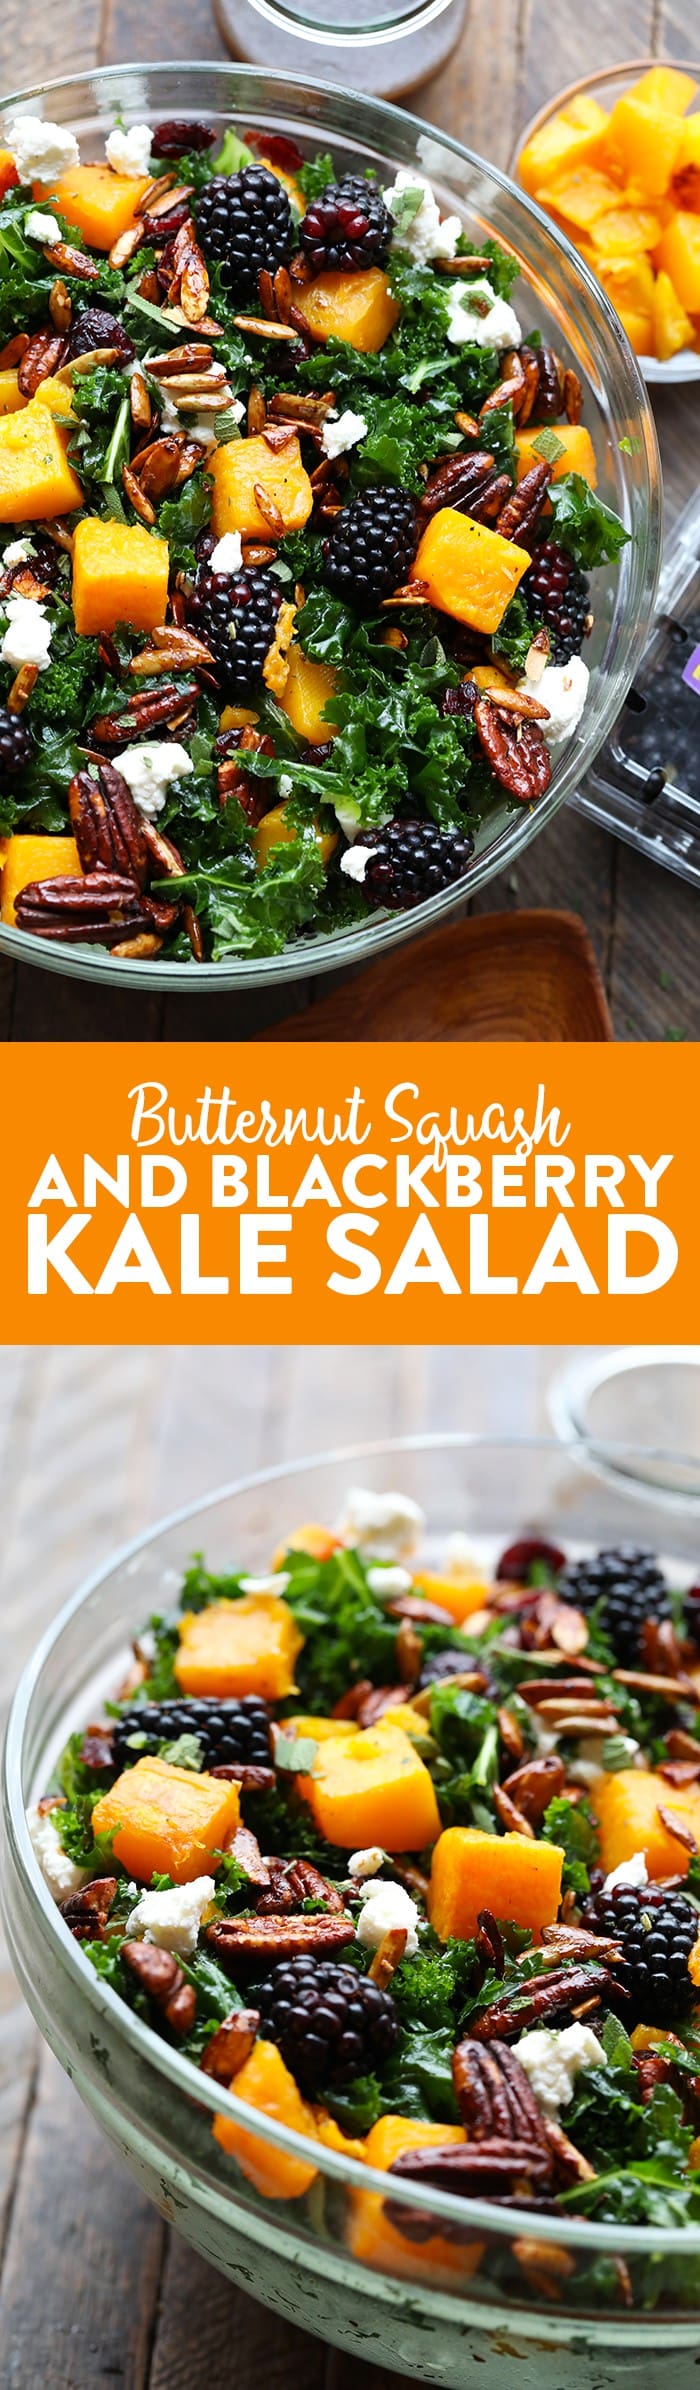 This Harvest Blackberry and Butternut Squash Massaged Kale Salad is an excellent healthy lunch or dinner and even doubles as a holiday salad to share. It's made with roasted butternut squash, candied nuts, Driscoll's blackberries, and massaged kale with a homemade dressing!